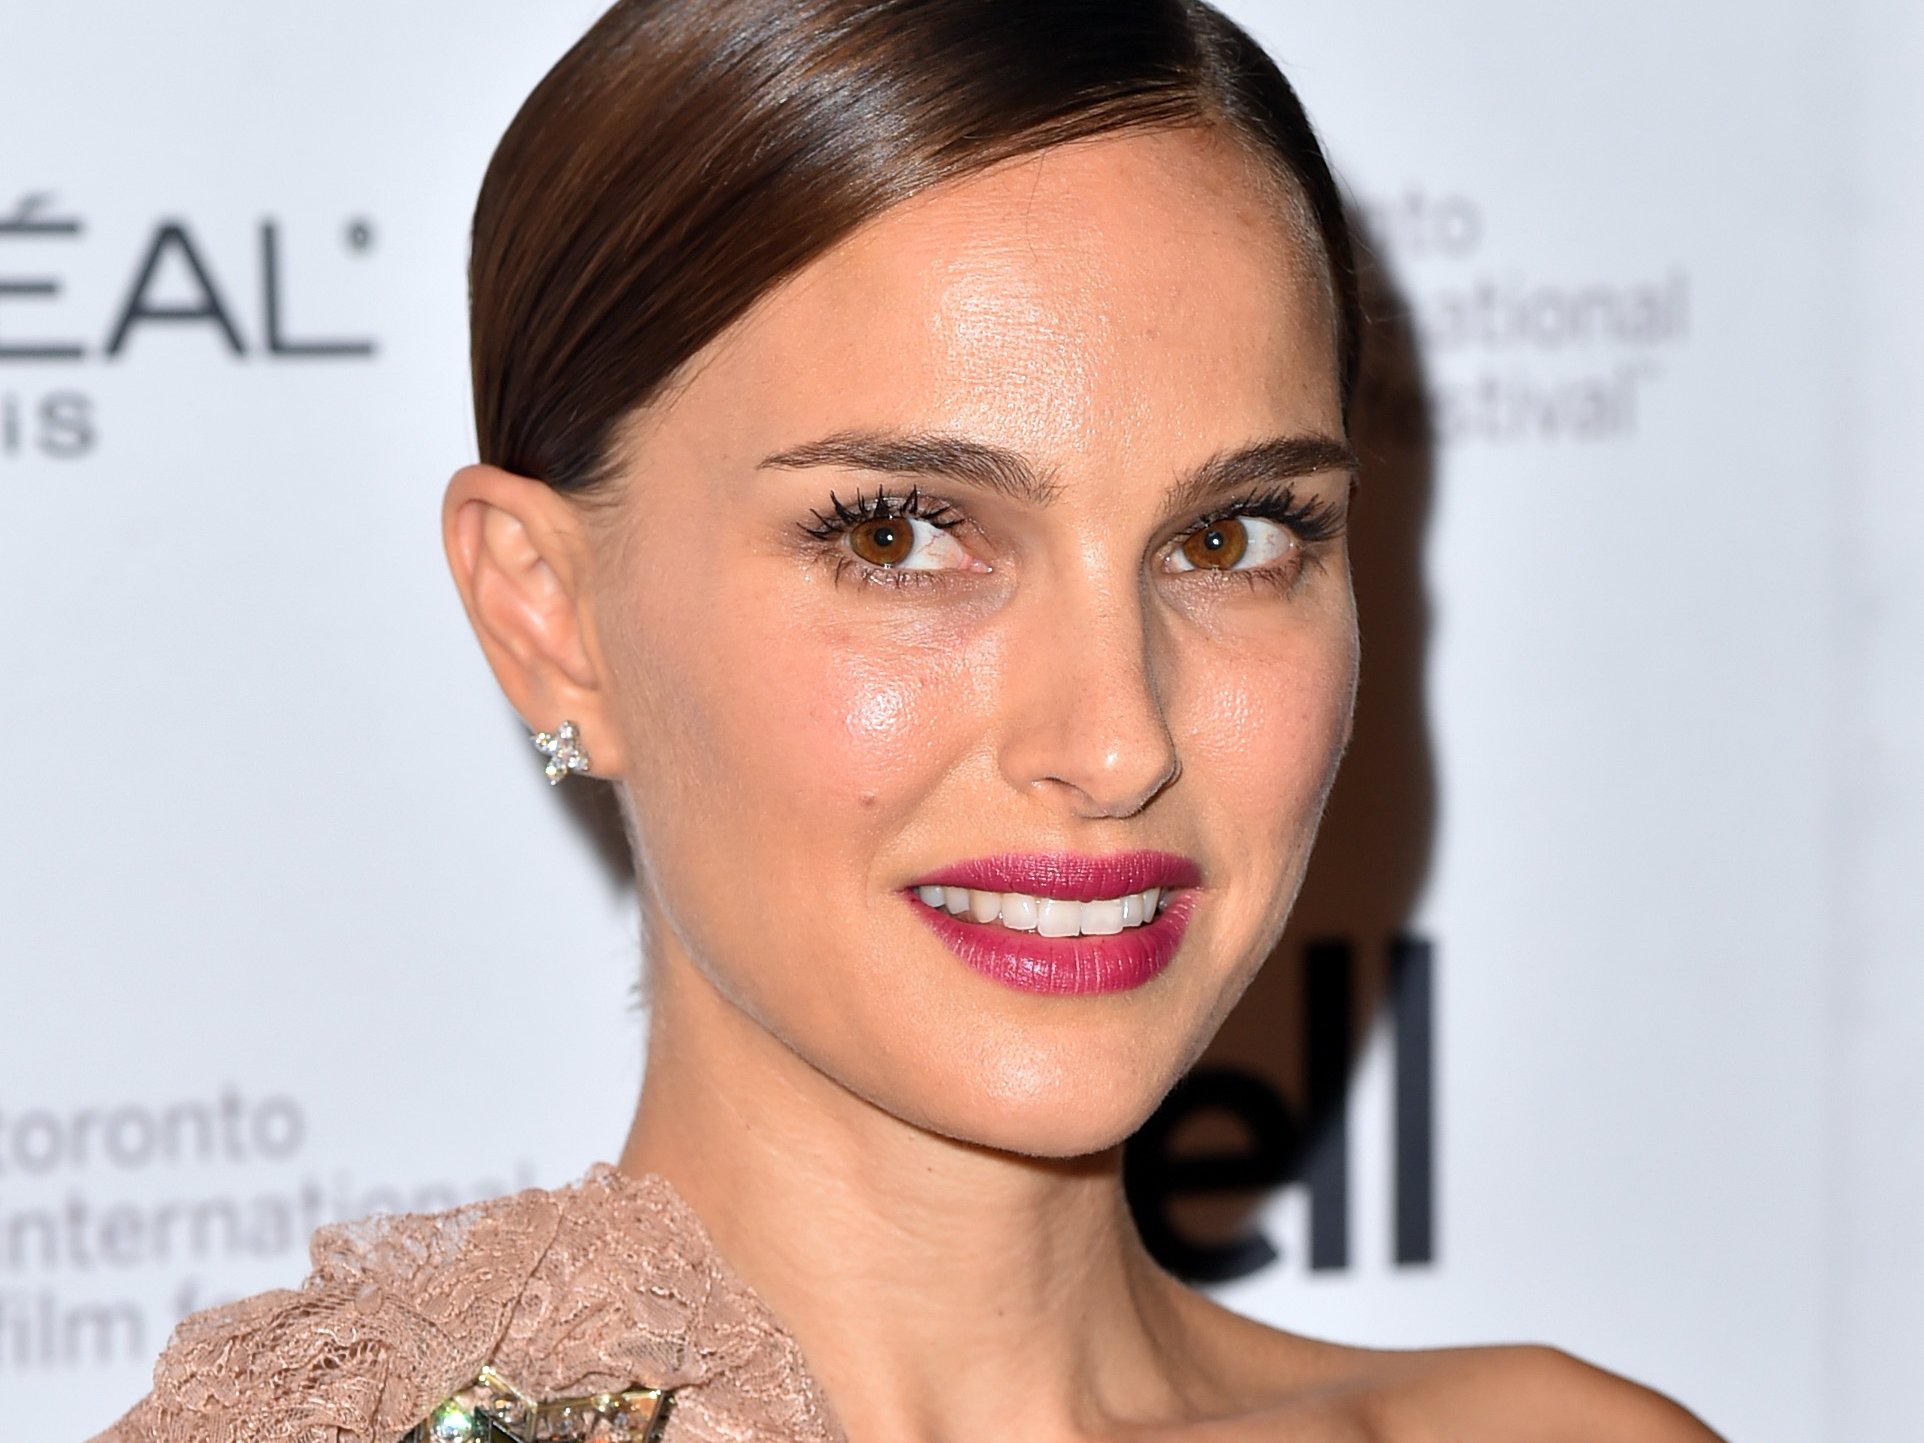 Happy birthday to the beautiful, intelligent and talented Natalie Portman! 